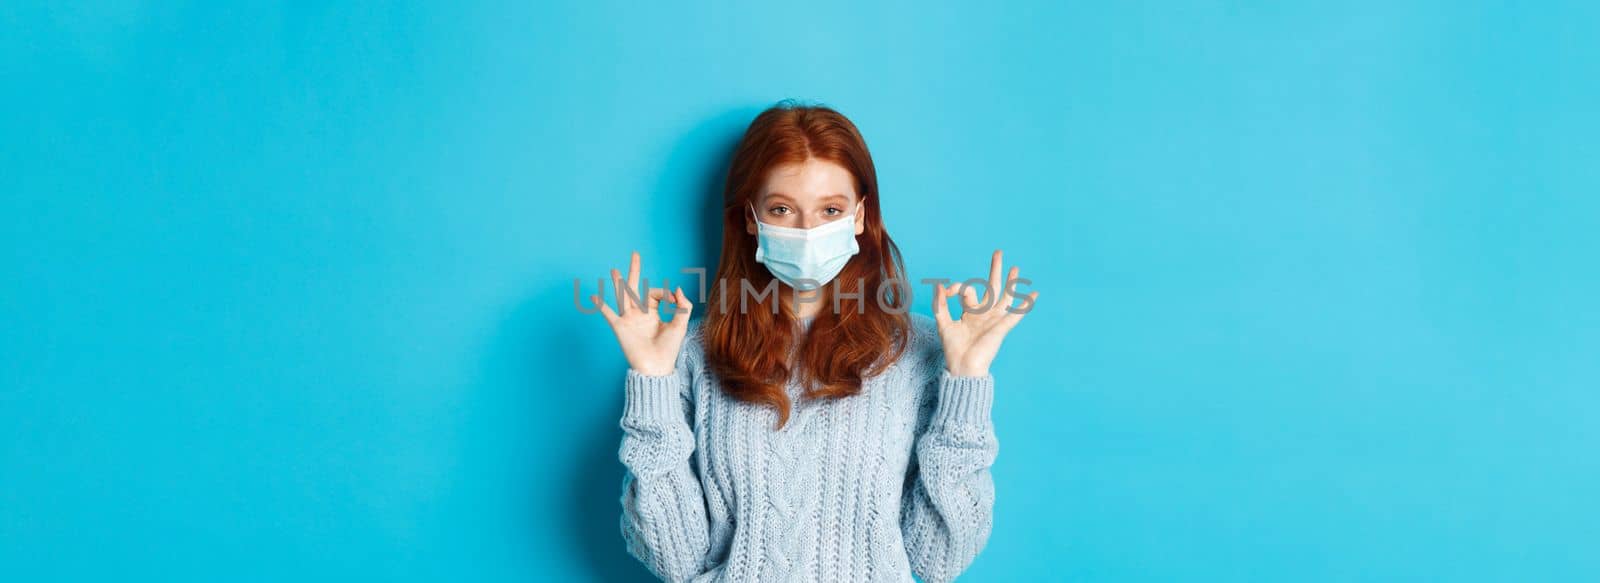 Winter, covid-19 and social distancing concept. Satisfied young redhead woman in face mask showing alright, okay gestures and looking pleased, standing blue background.